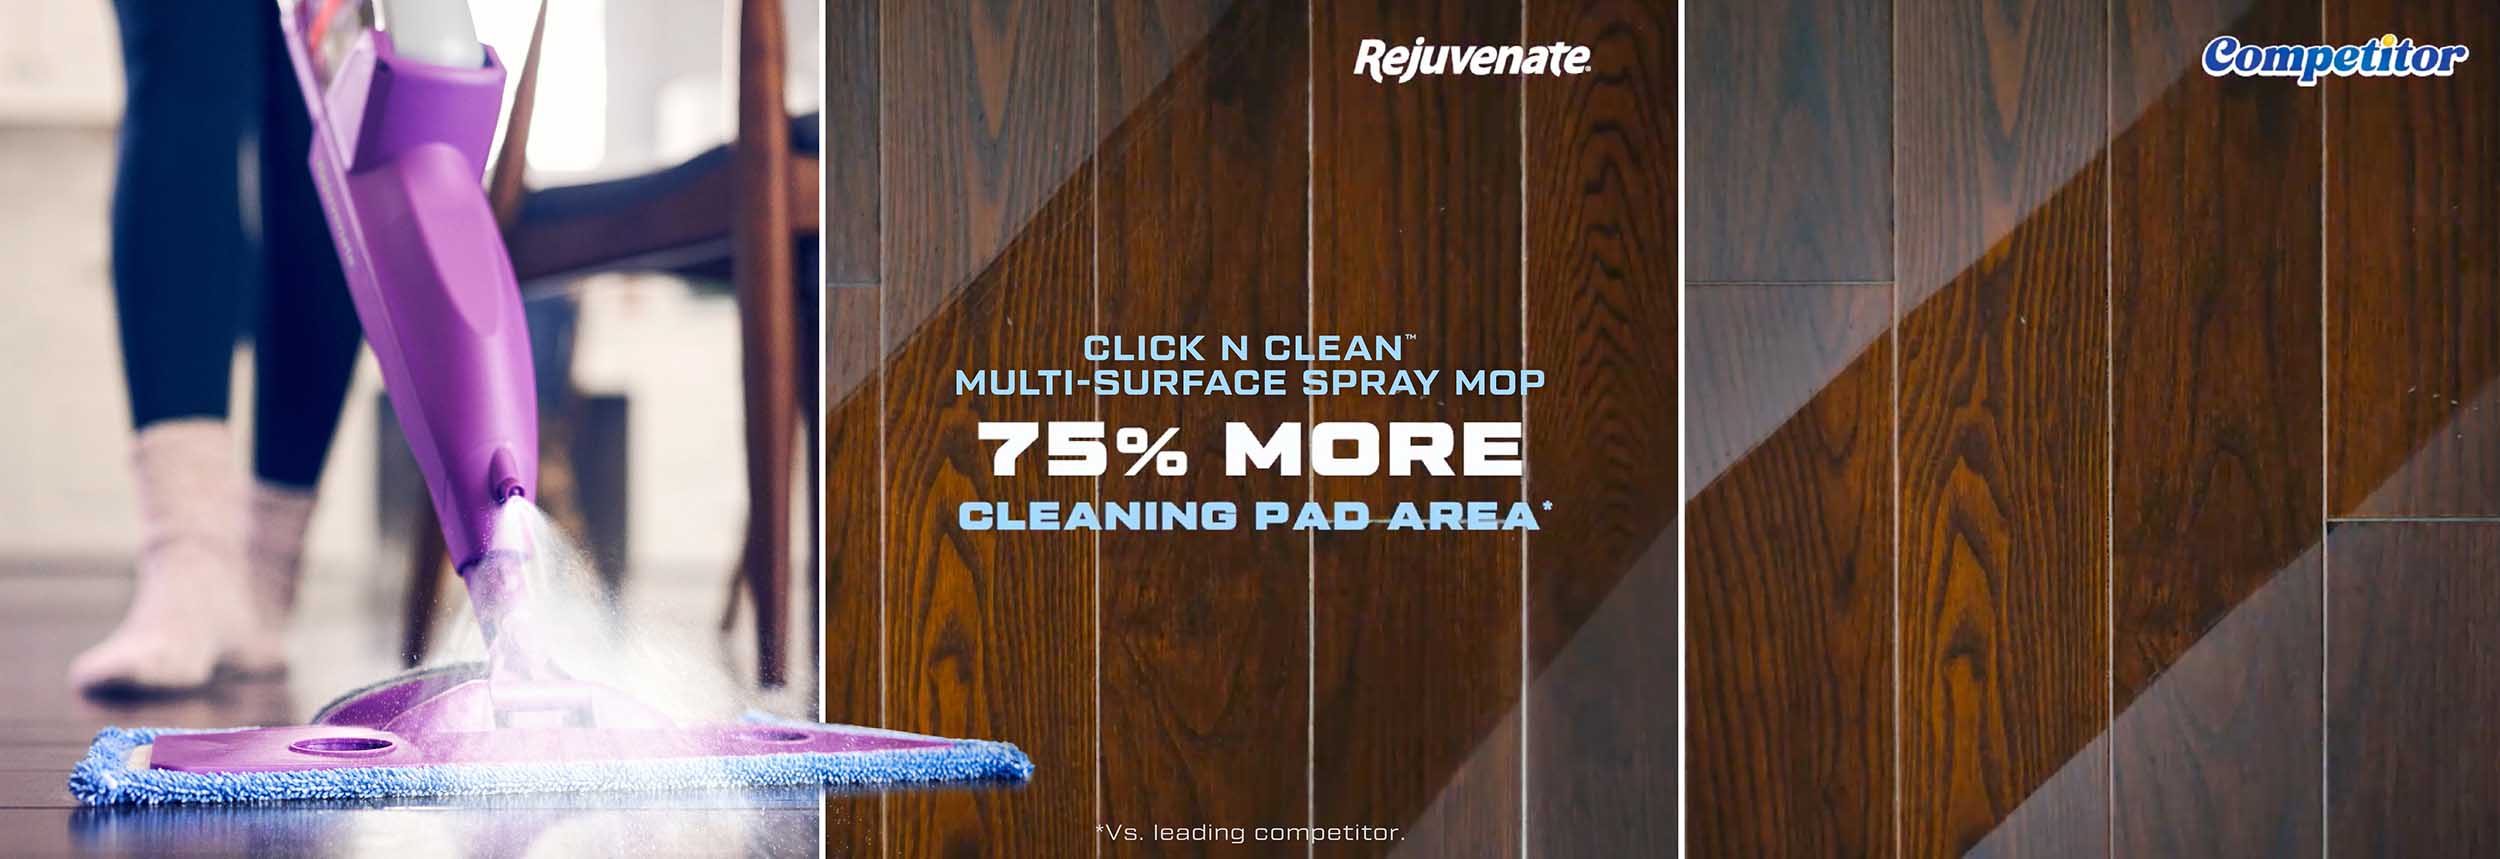 75% More Cleaning Pad Area - Desktop